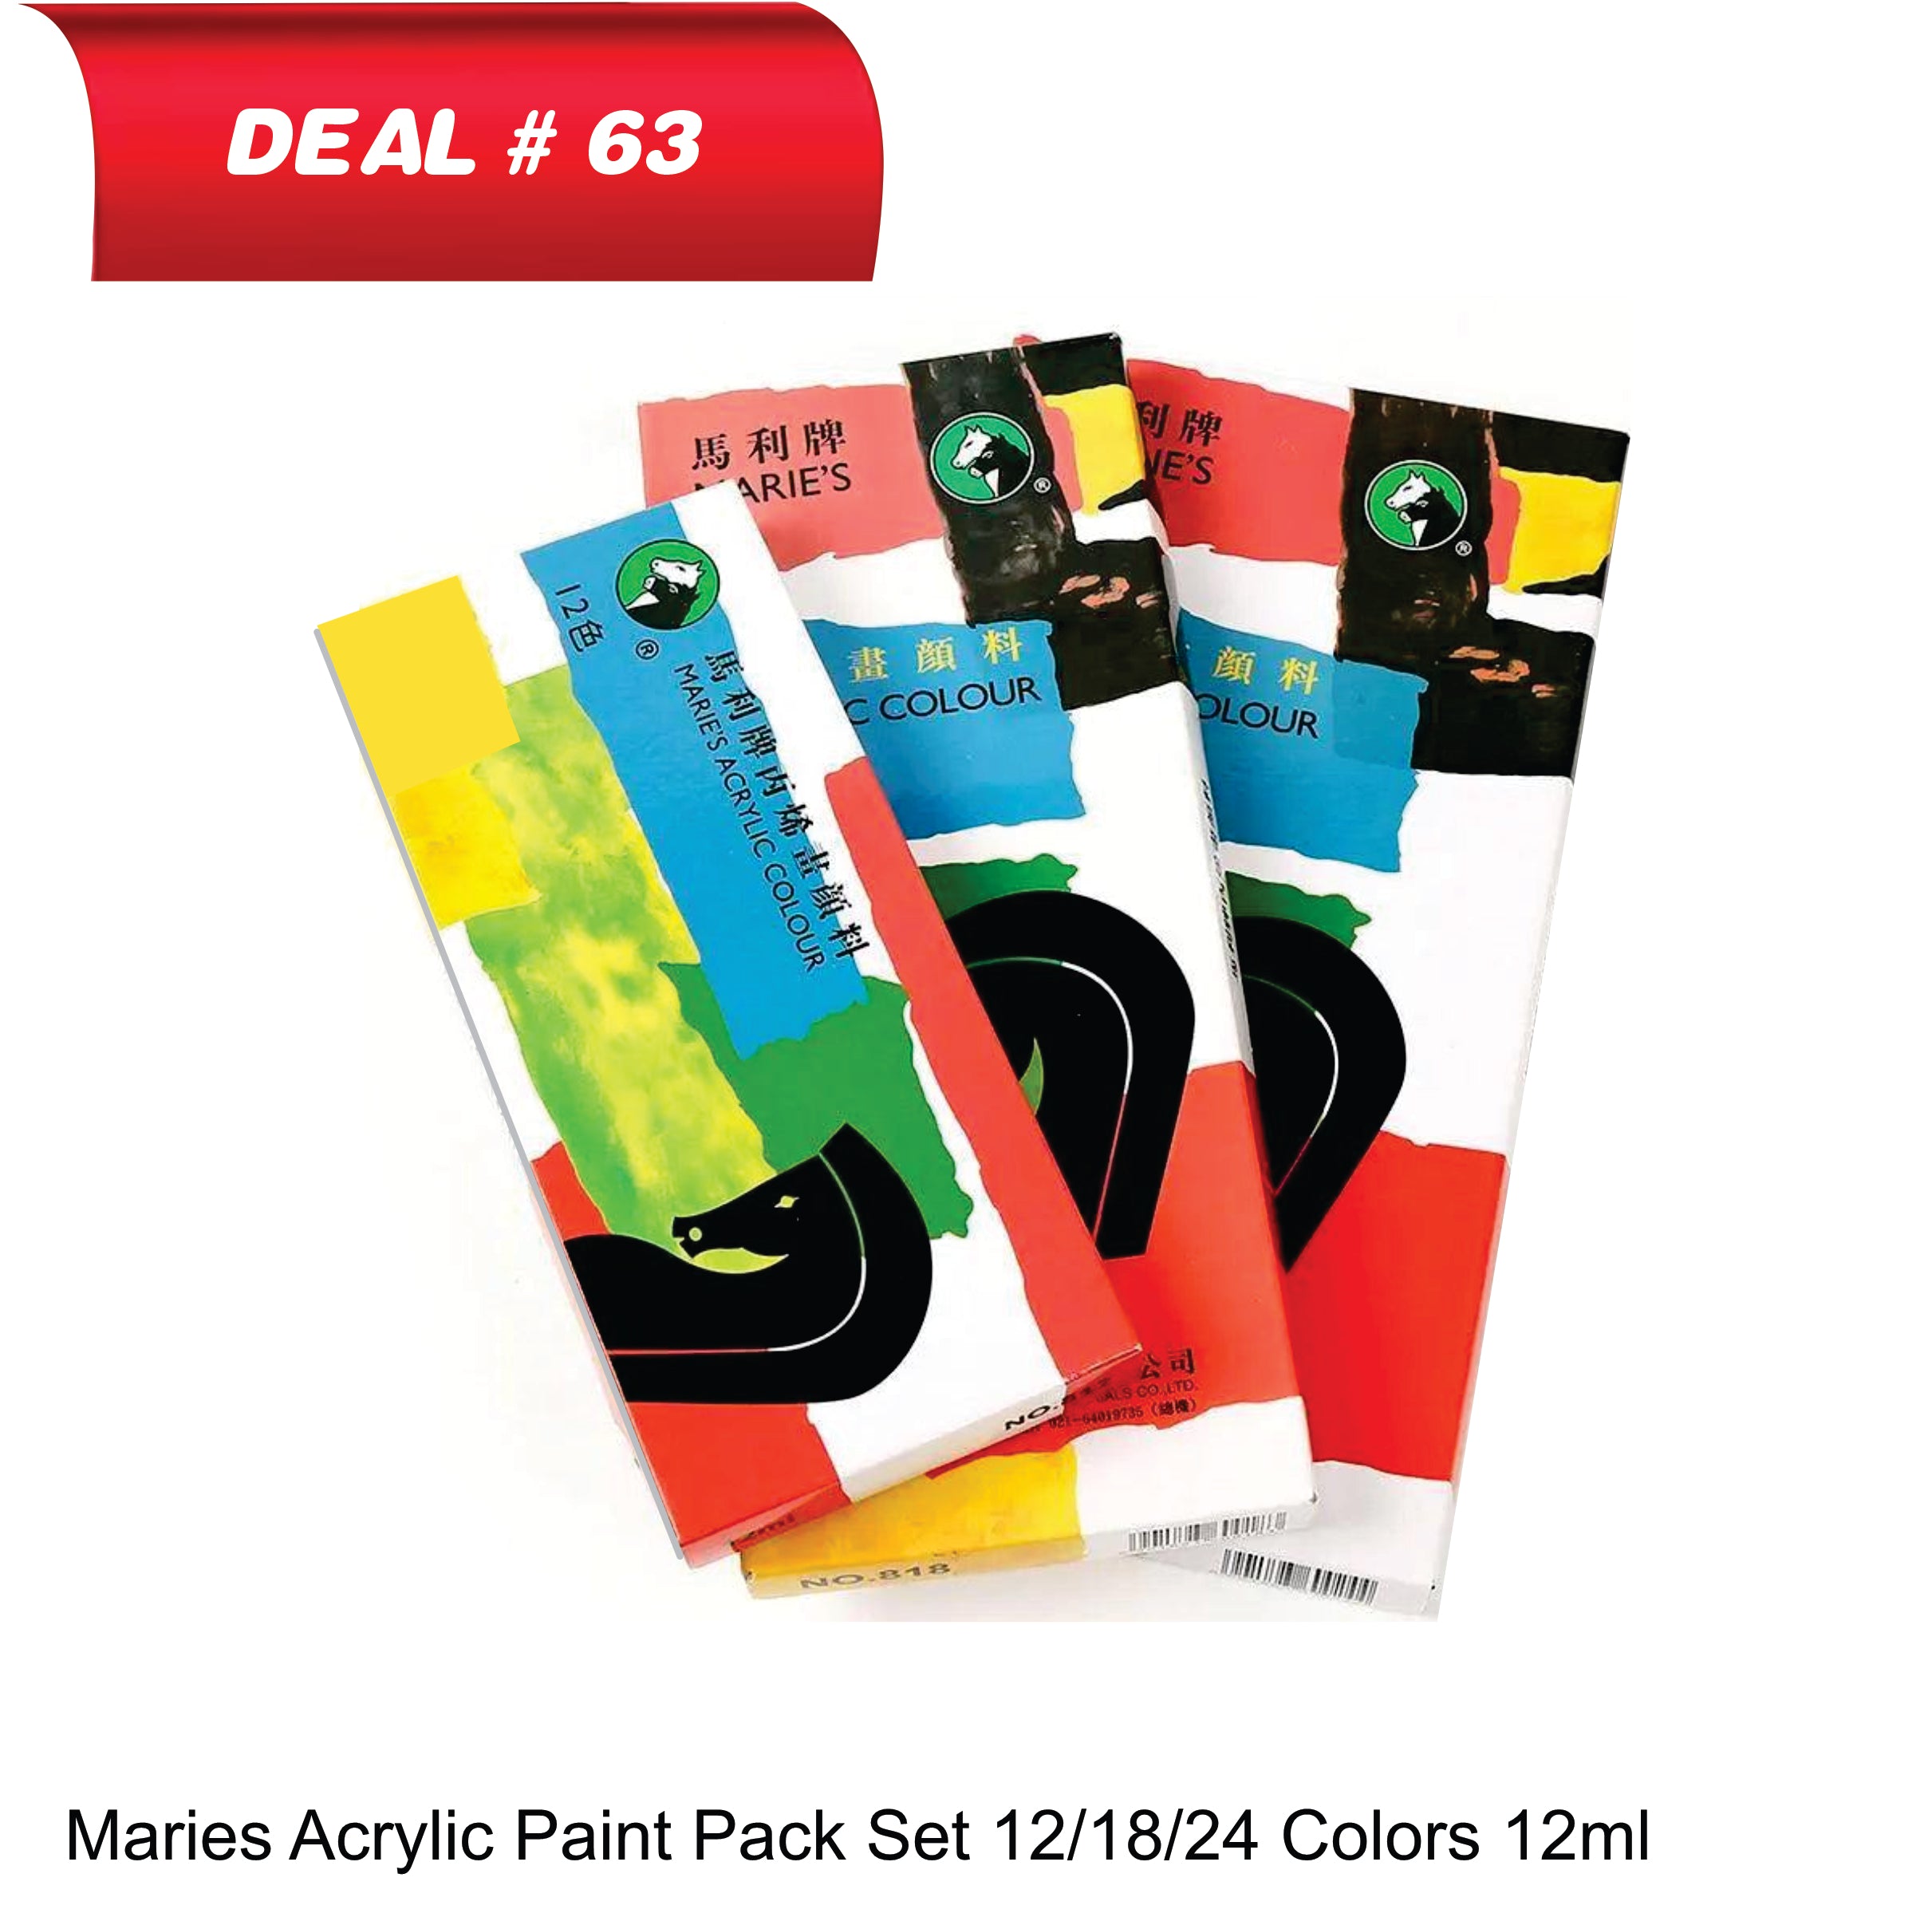 Maries Acrylic Paints Deal No.63